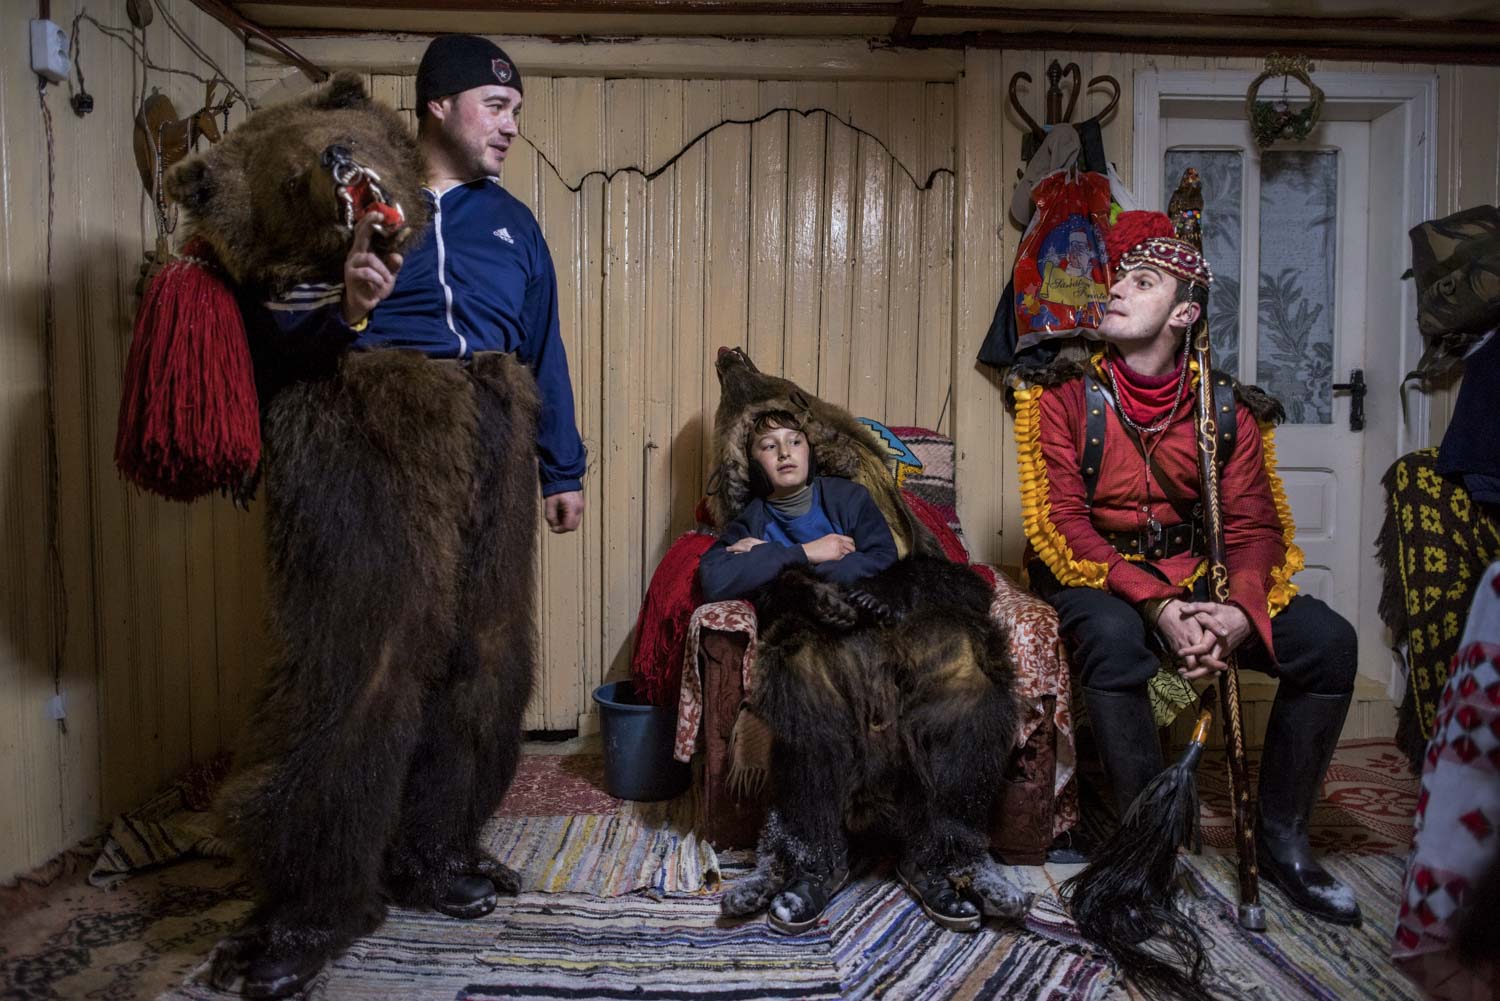  Cătălin Apetroaie chats on his porch with a young bear and Gabriel Hanganu, the 'bear tamer.'  The troupe, led by Dumitru Toloaca, has just finished performing for Apetroaie's family and are resting before they continue on to the homes of other patr